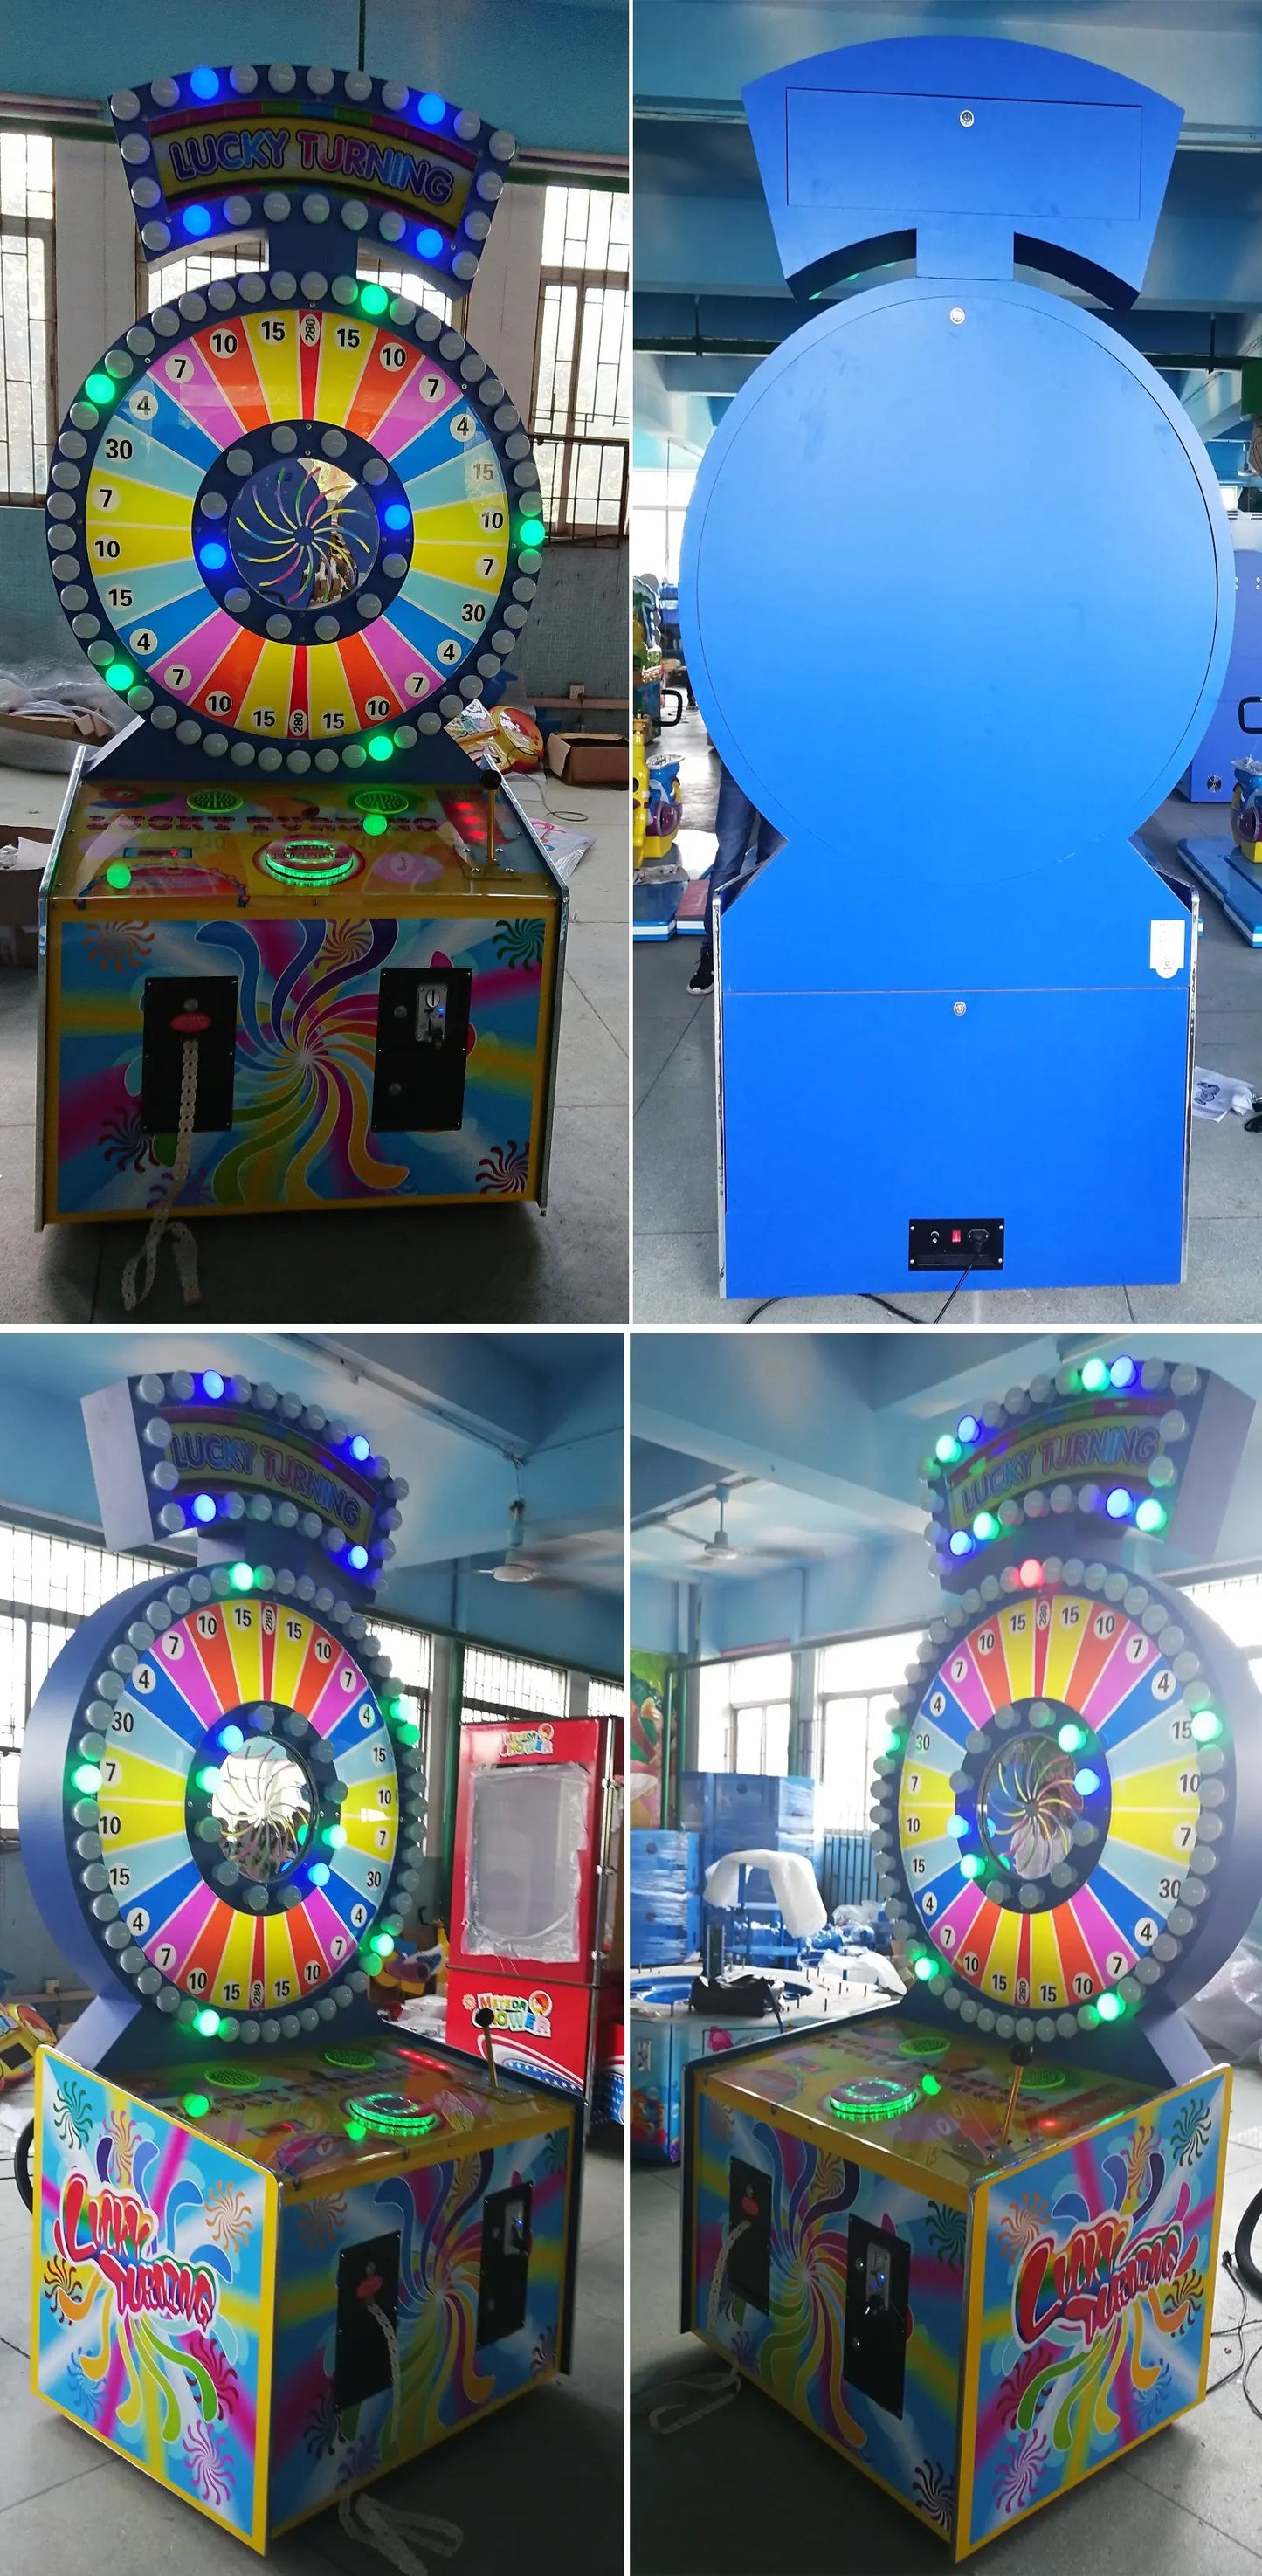 Lucky-spin-Turning-Lottery-game-machine-Indoor-amusement-coin-operated-ticket-redemption-games-Tomy-Arcade